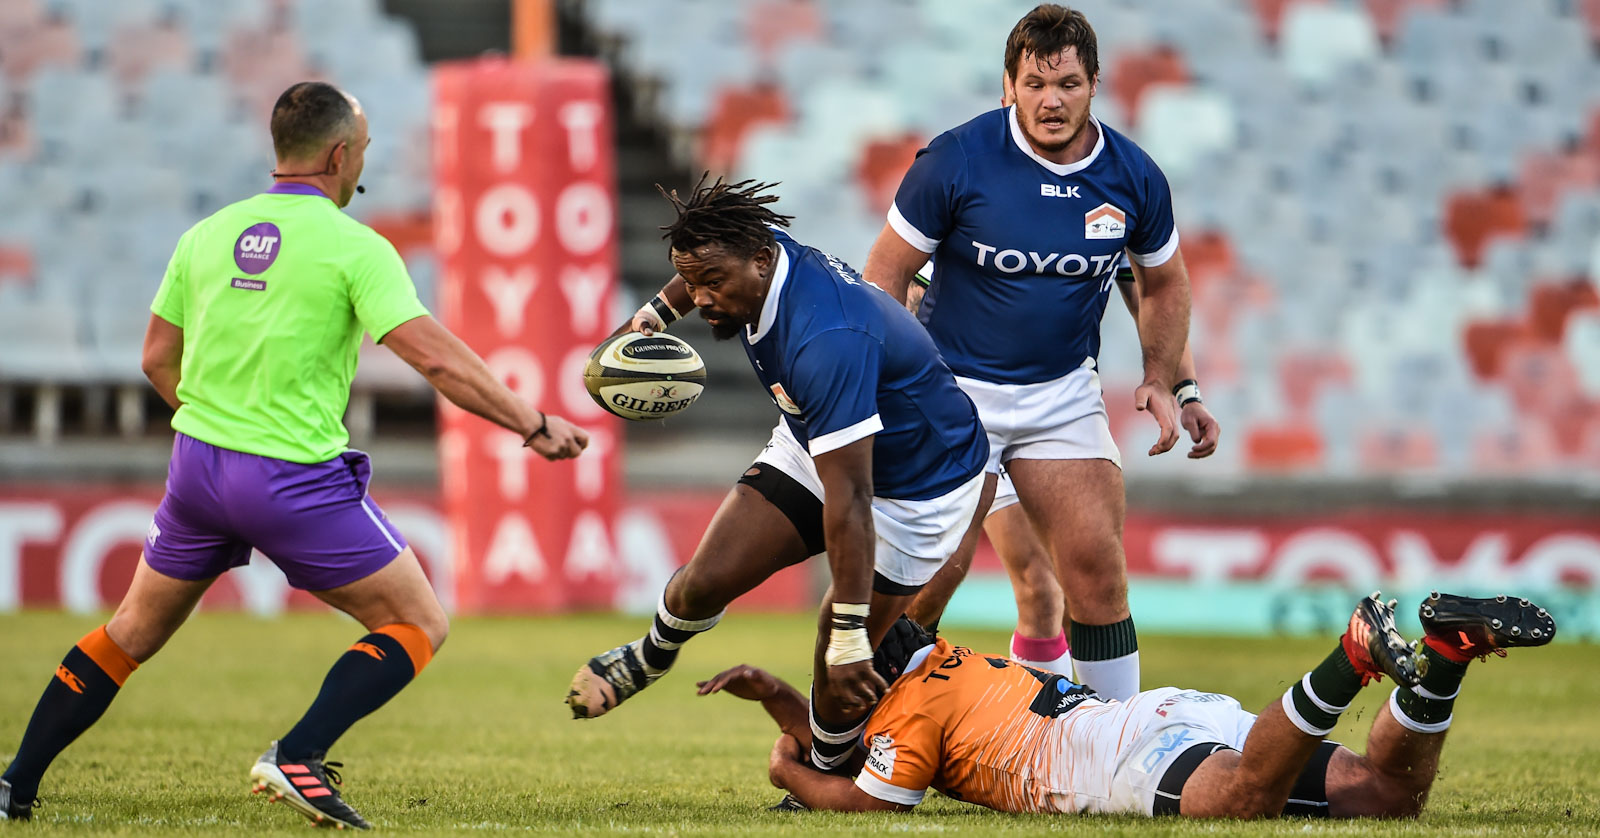 Cell C Sharks prop Kwezi Mona on the charge for the Toyota Invitational side.